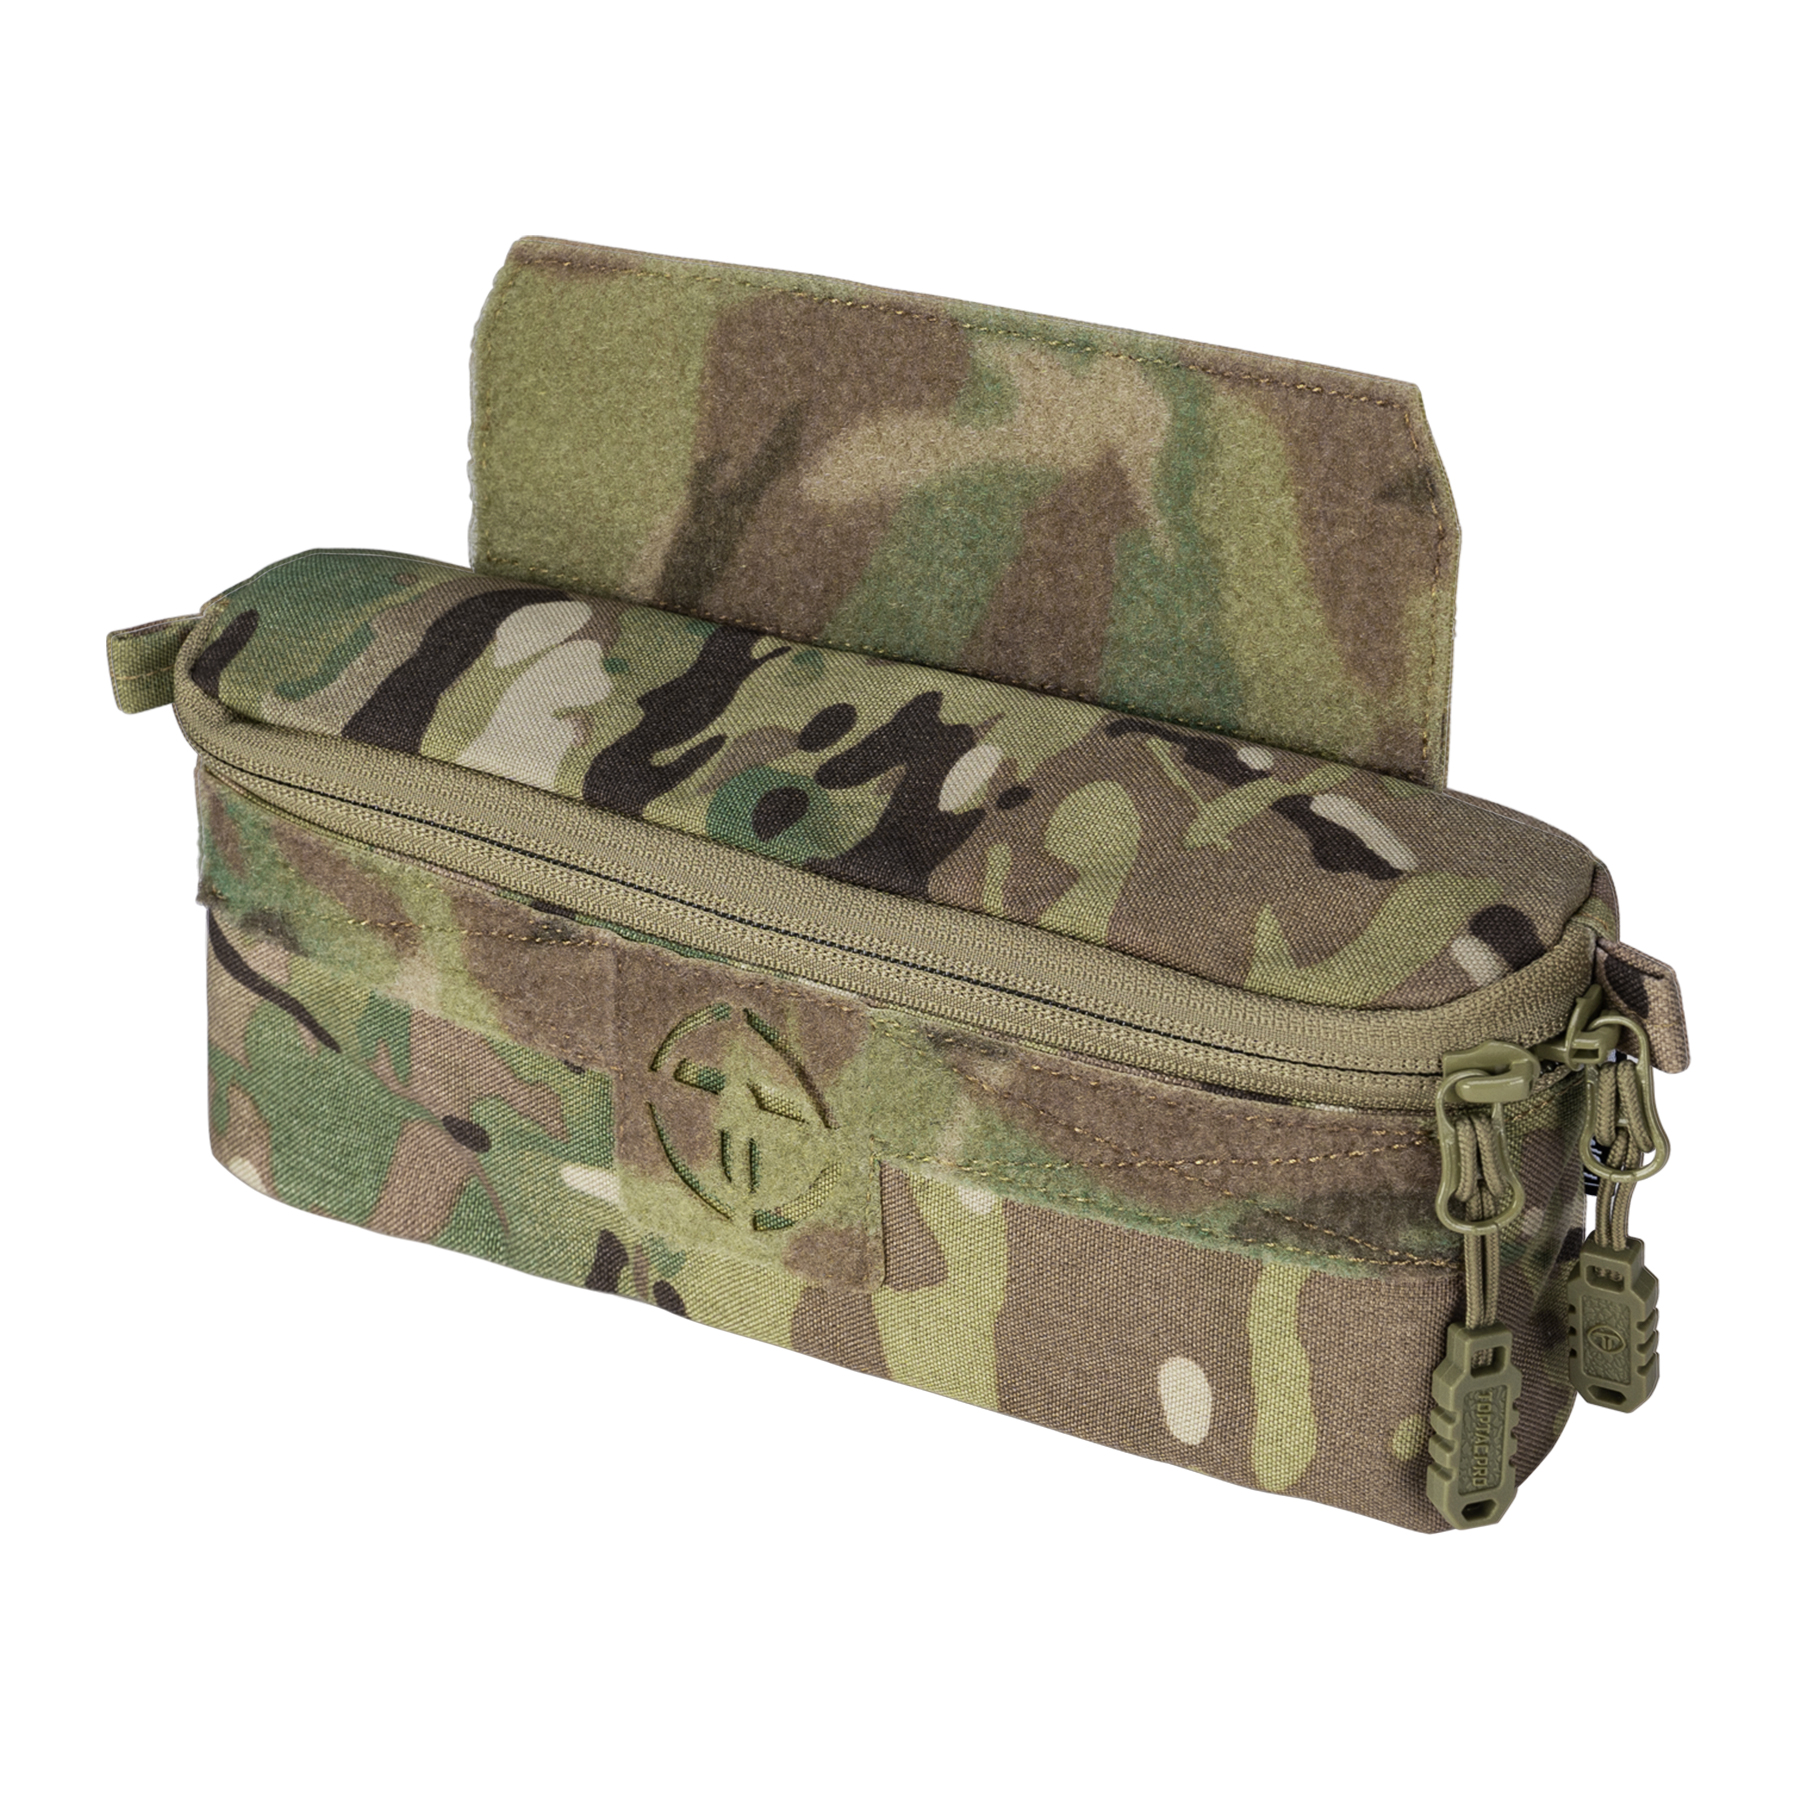 TOPTACPRO Tactical Dump Drop Pouch Molle Admin Pouch Utility Tool Organizer Pouch Multicamo for JPC CPC AVS Vest Airsoft Paintball (Bag Only)8506